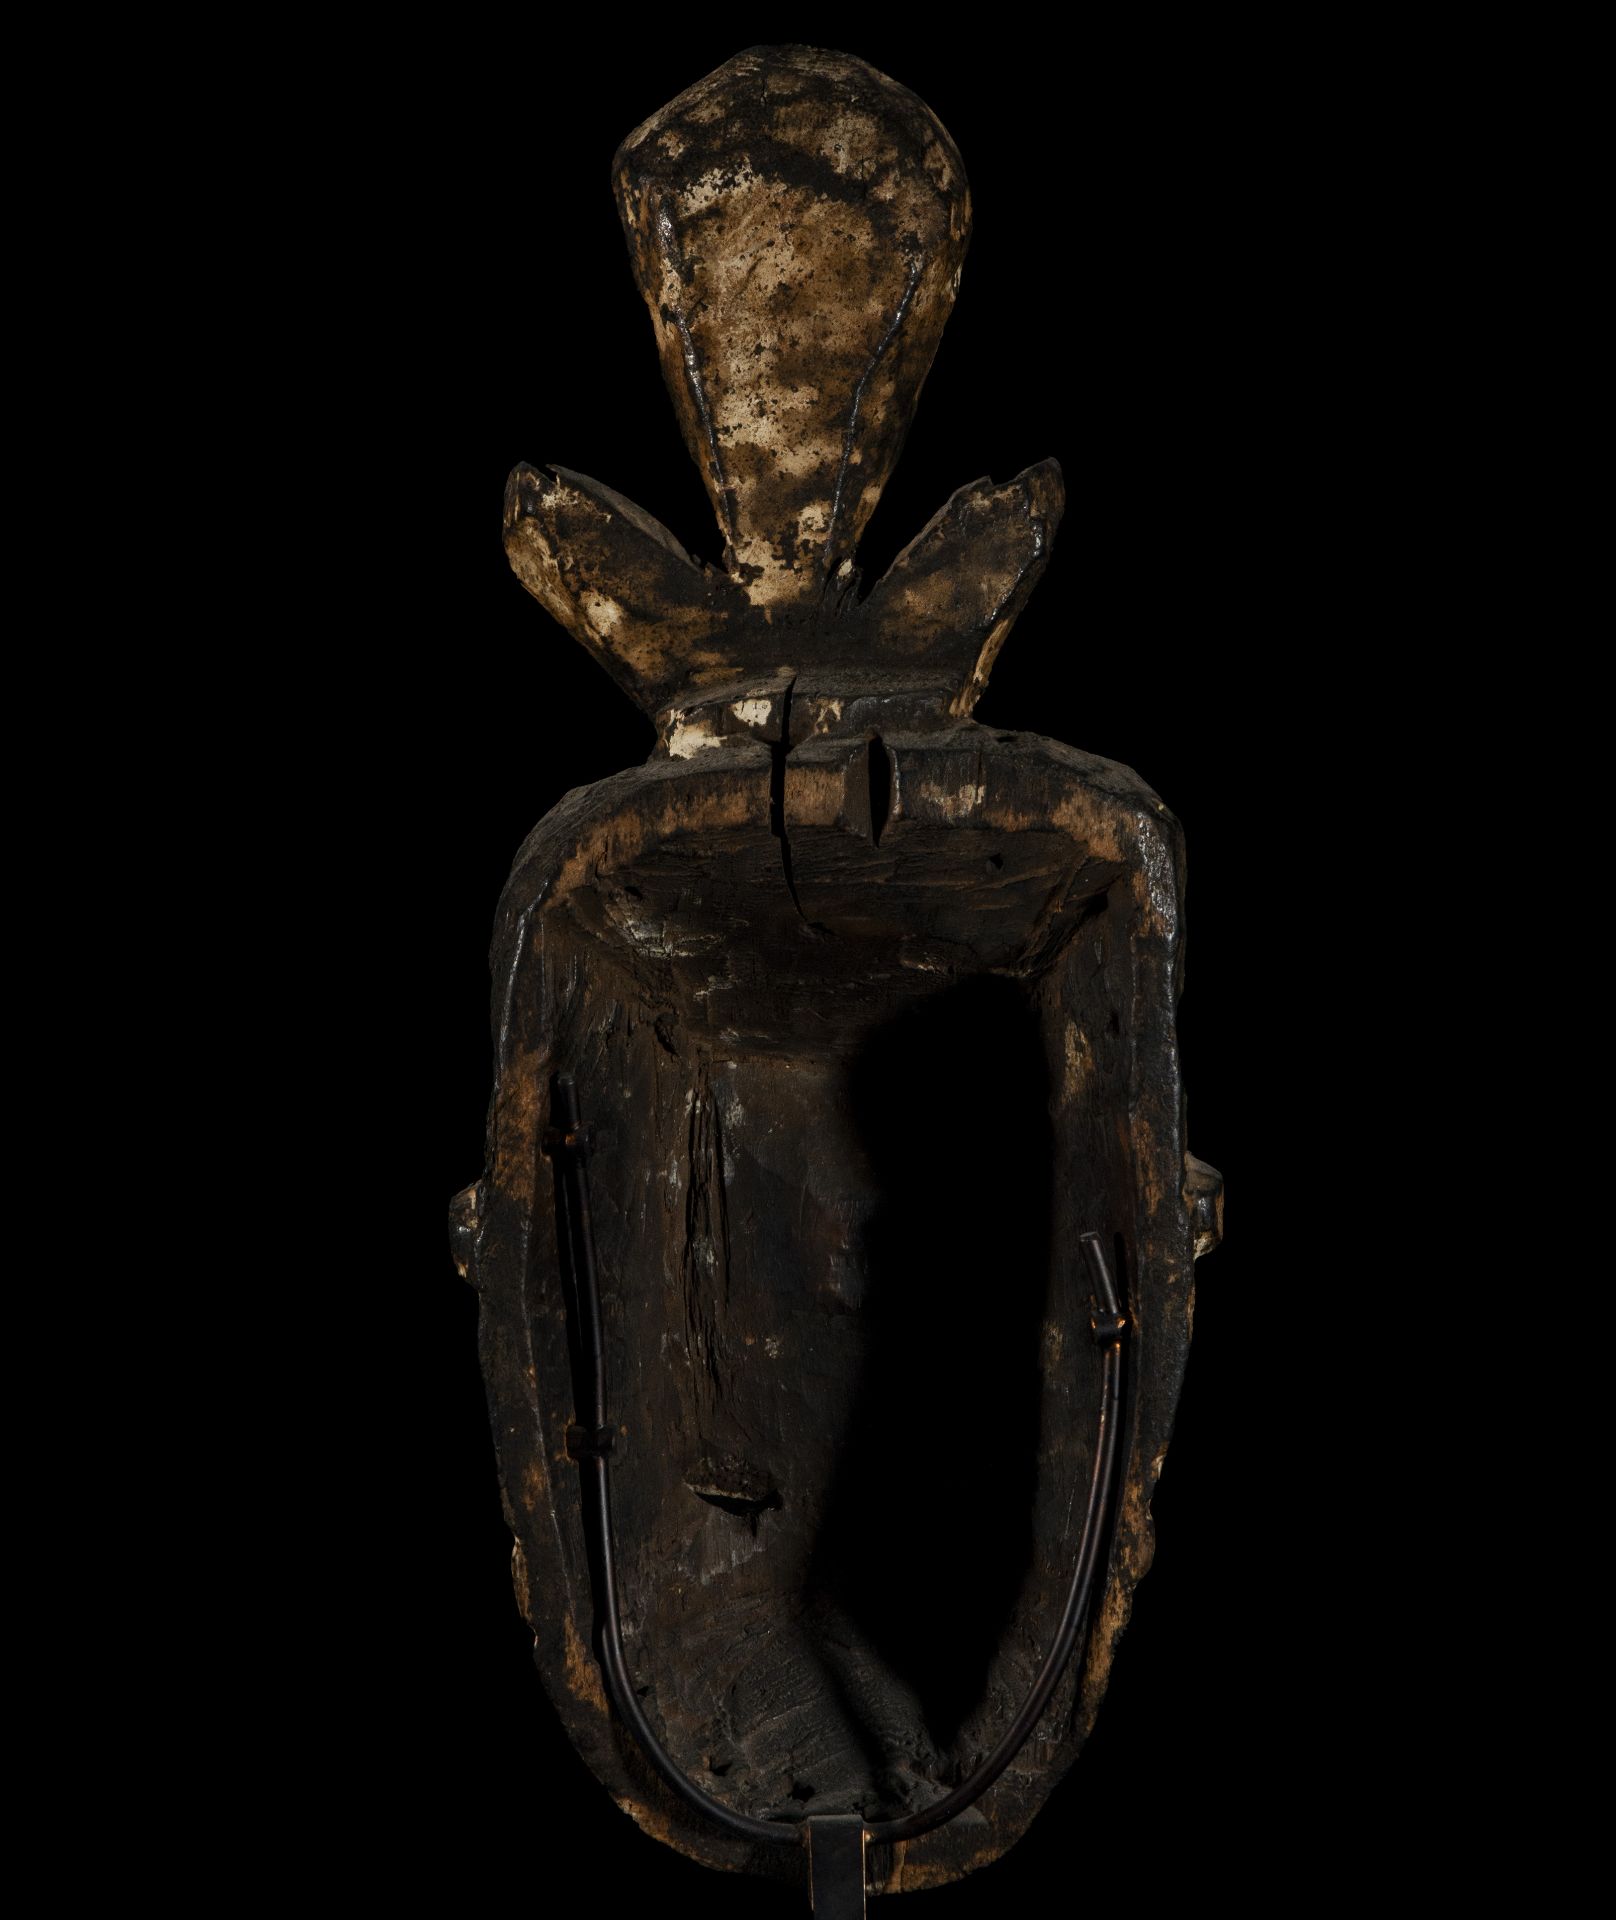 20th century African Bini ritual mask from Nigeria, certificate attached - Image 4 of 4